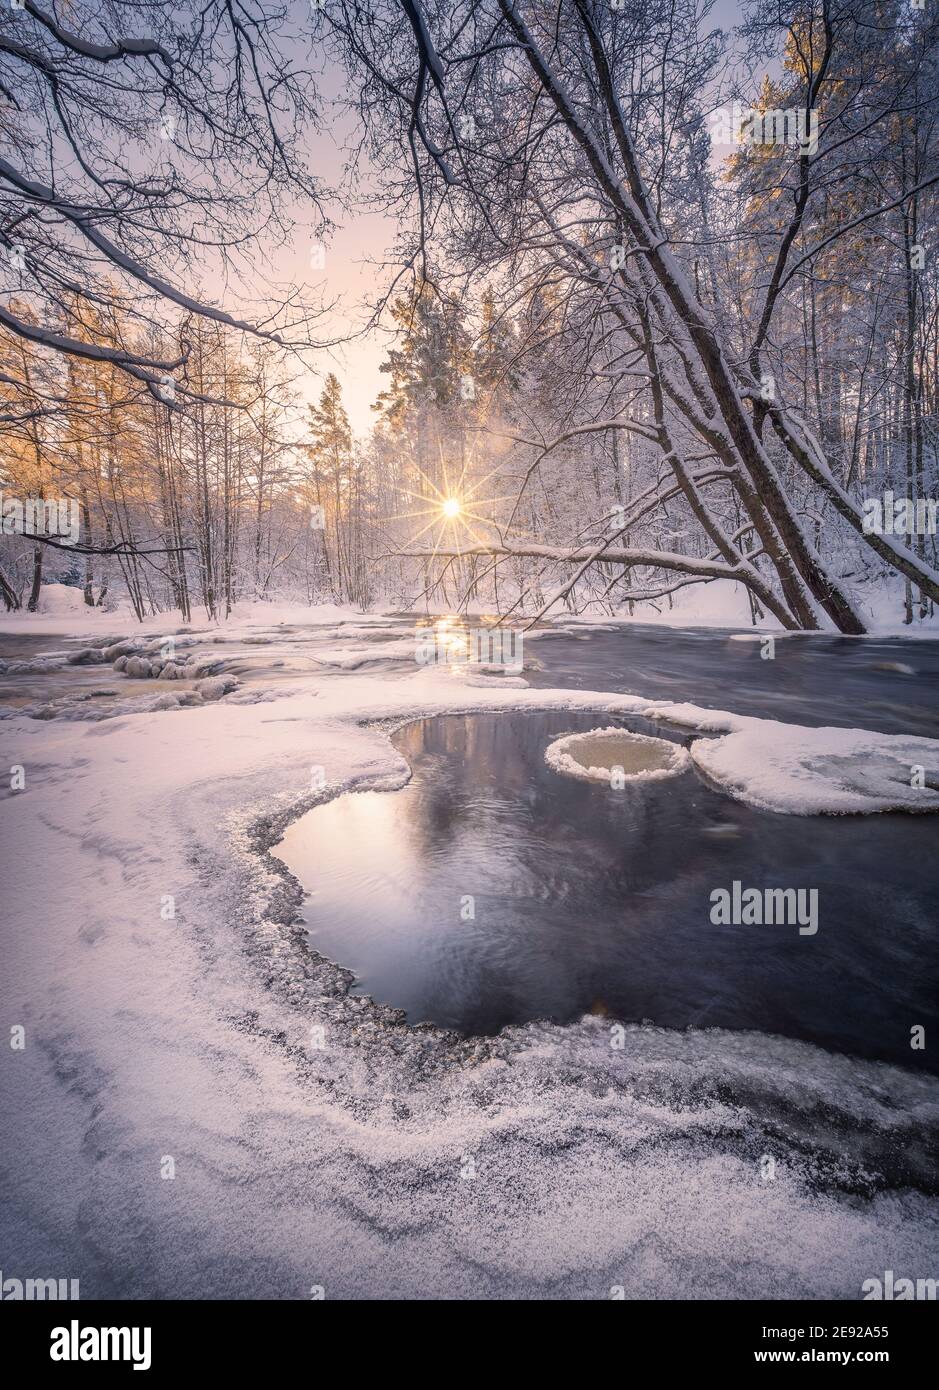 Scenic winter landscape with flowing river and morning light in Finland. Snowy trees. Stock Photo